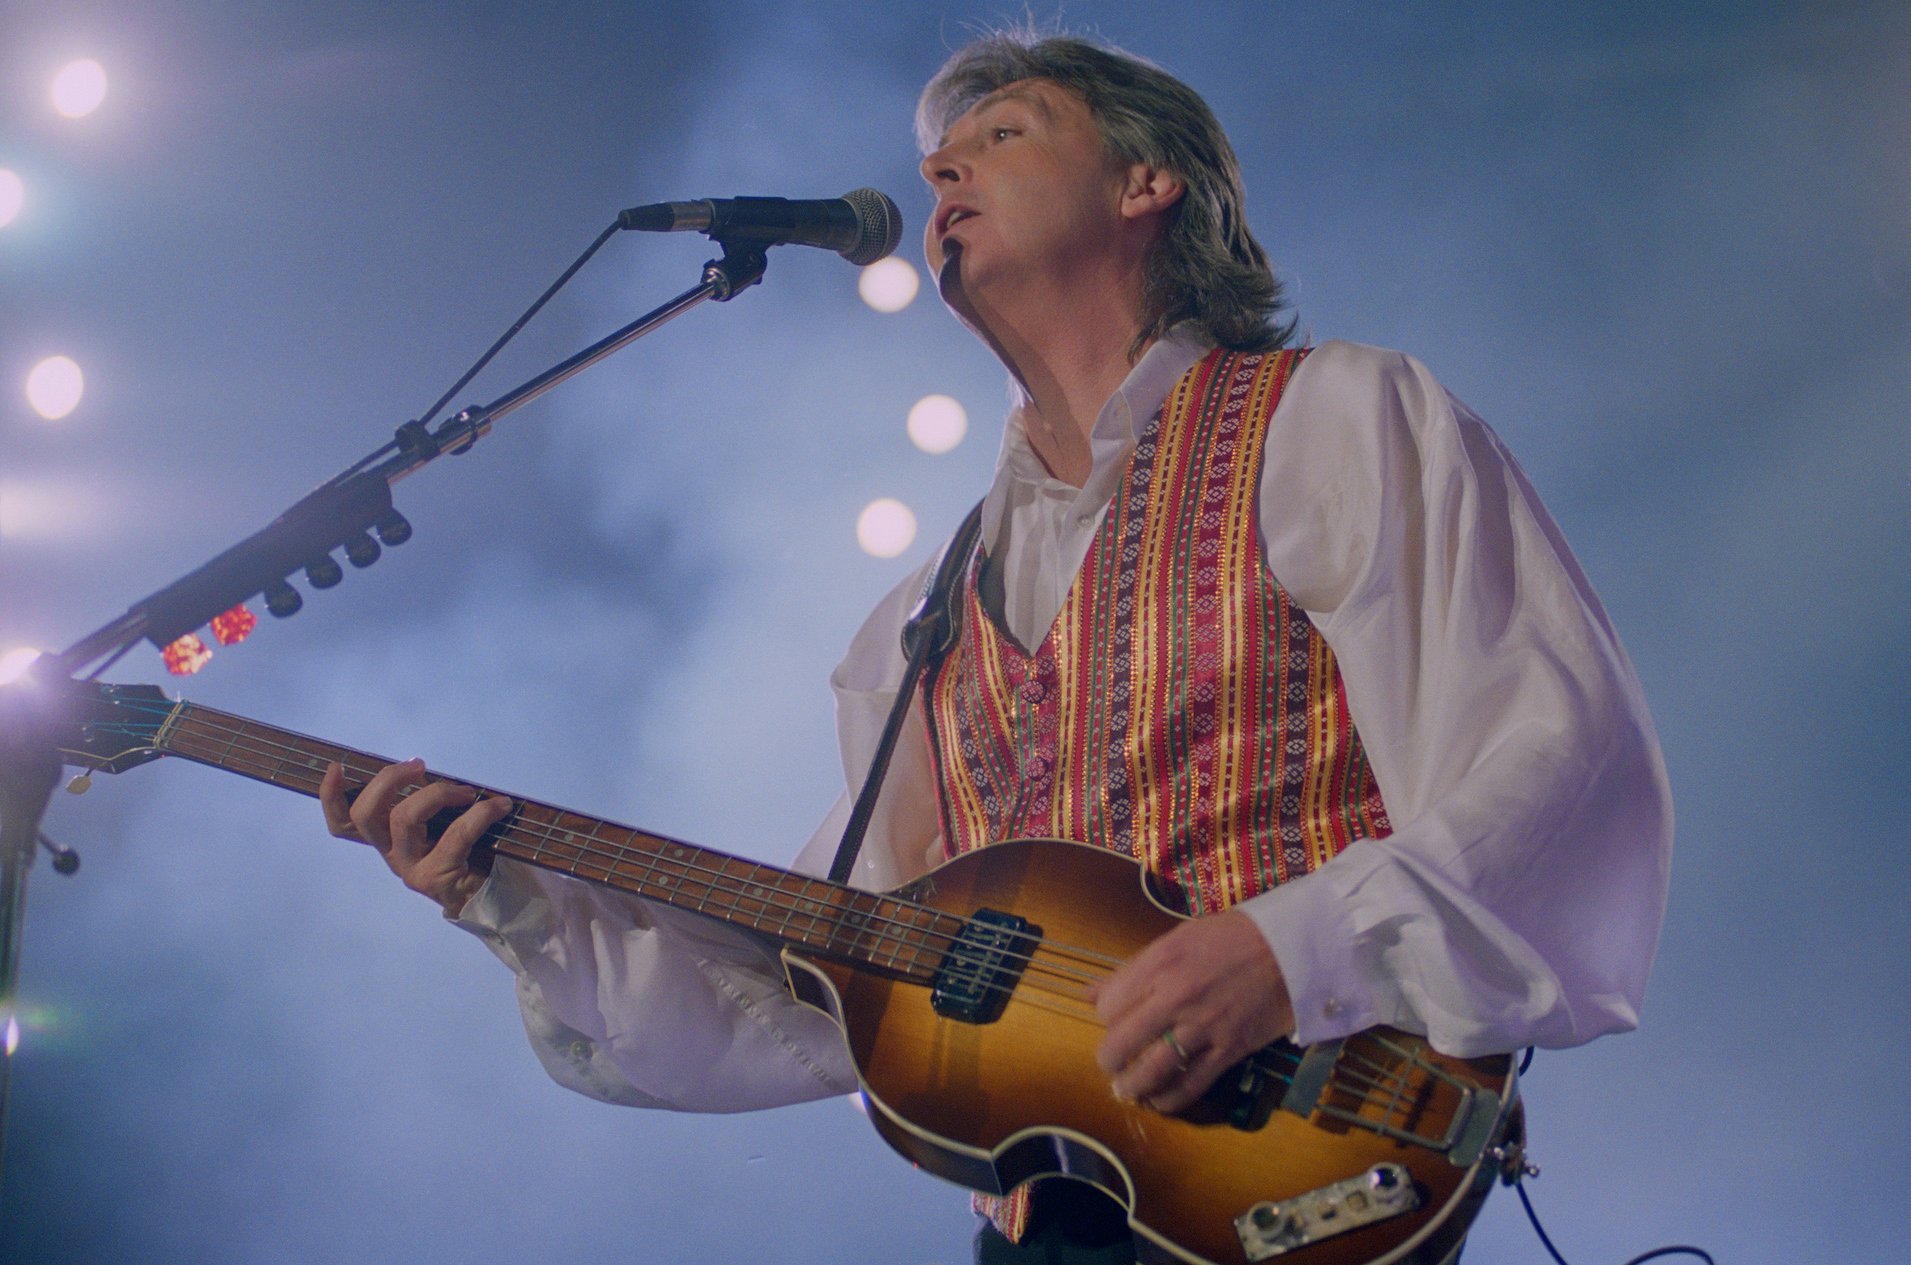 Paul McCartney performs on the New World Tour at the Docklands Arena in London in 1993